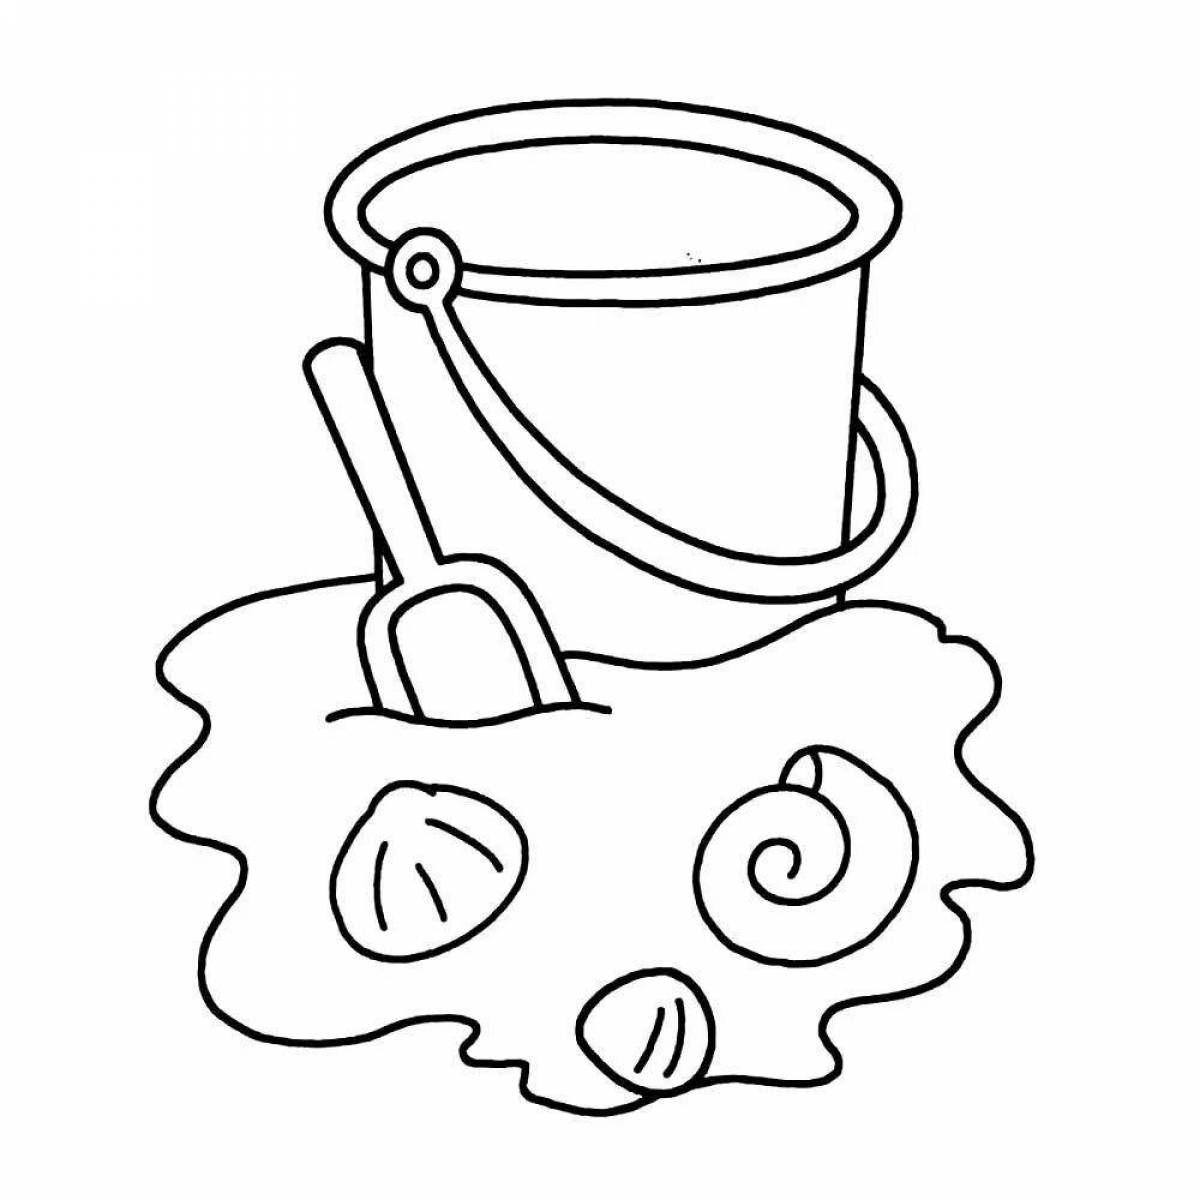 Tempting sand game coloring page